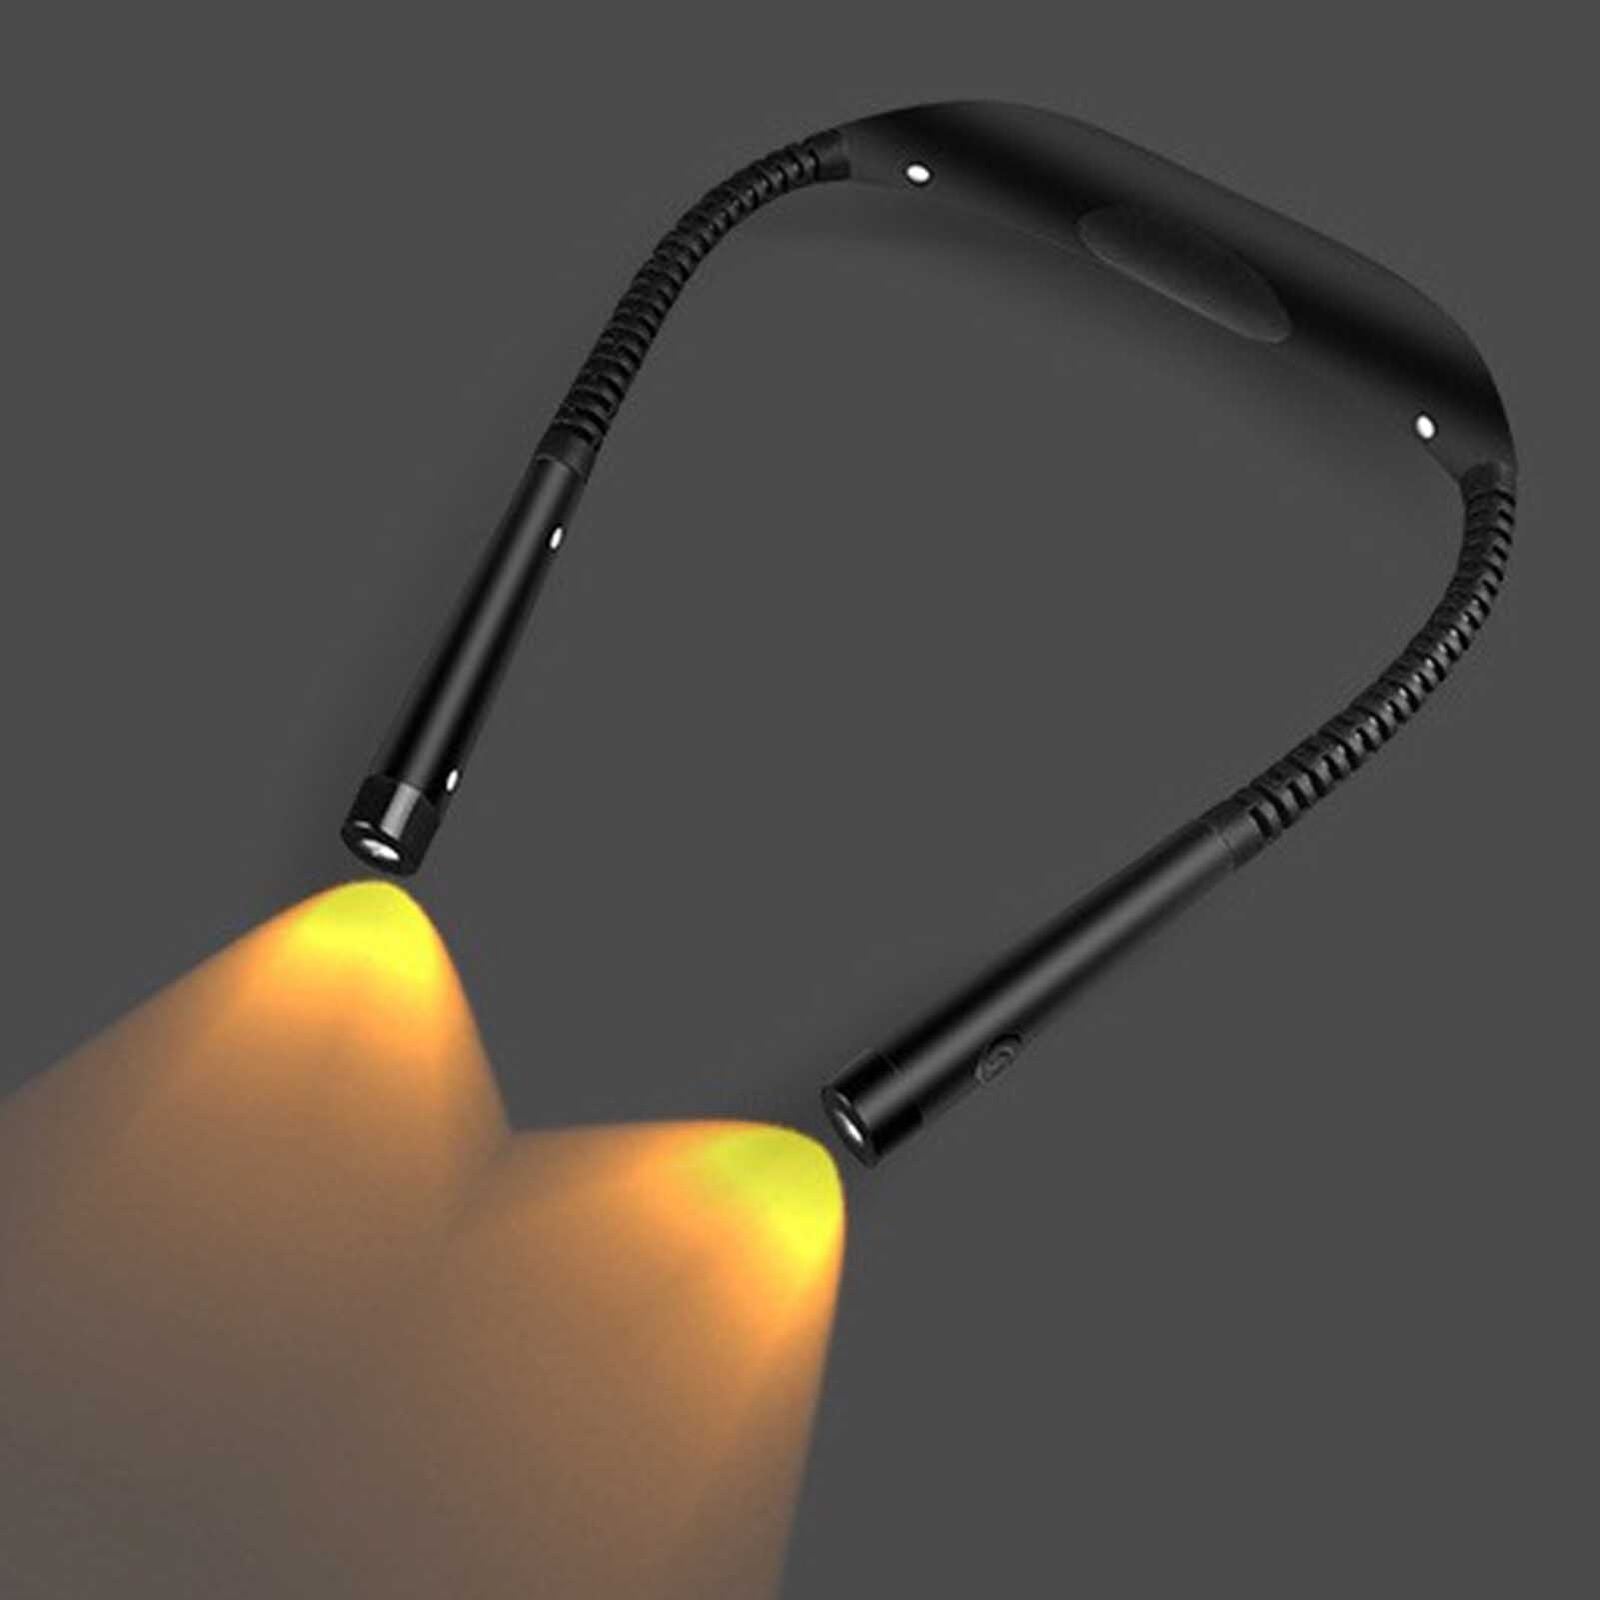 Black LED Neck Reading Light Flexible USB Rechargeable Hands Free Bed Night Book Lamp